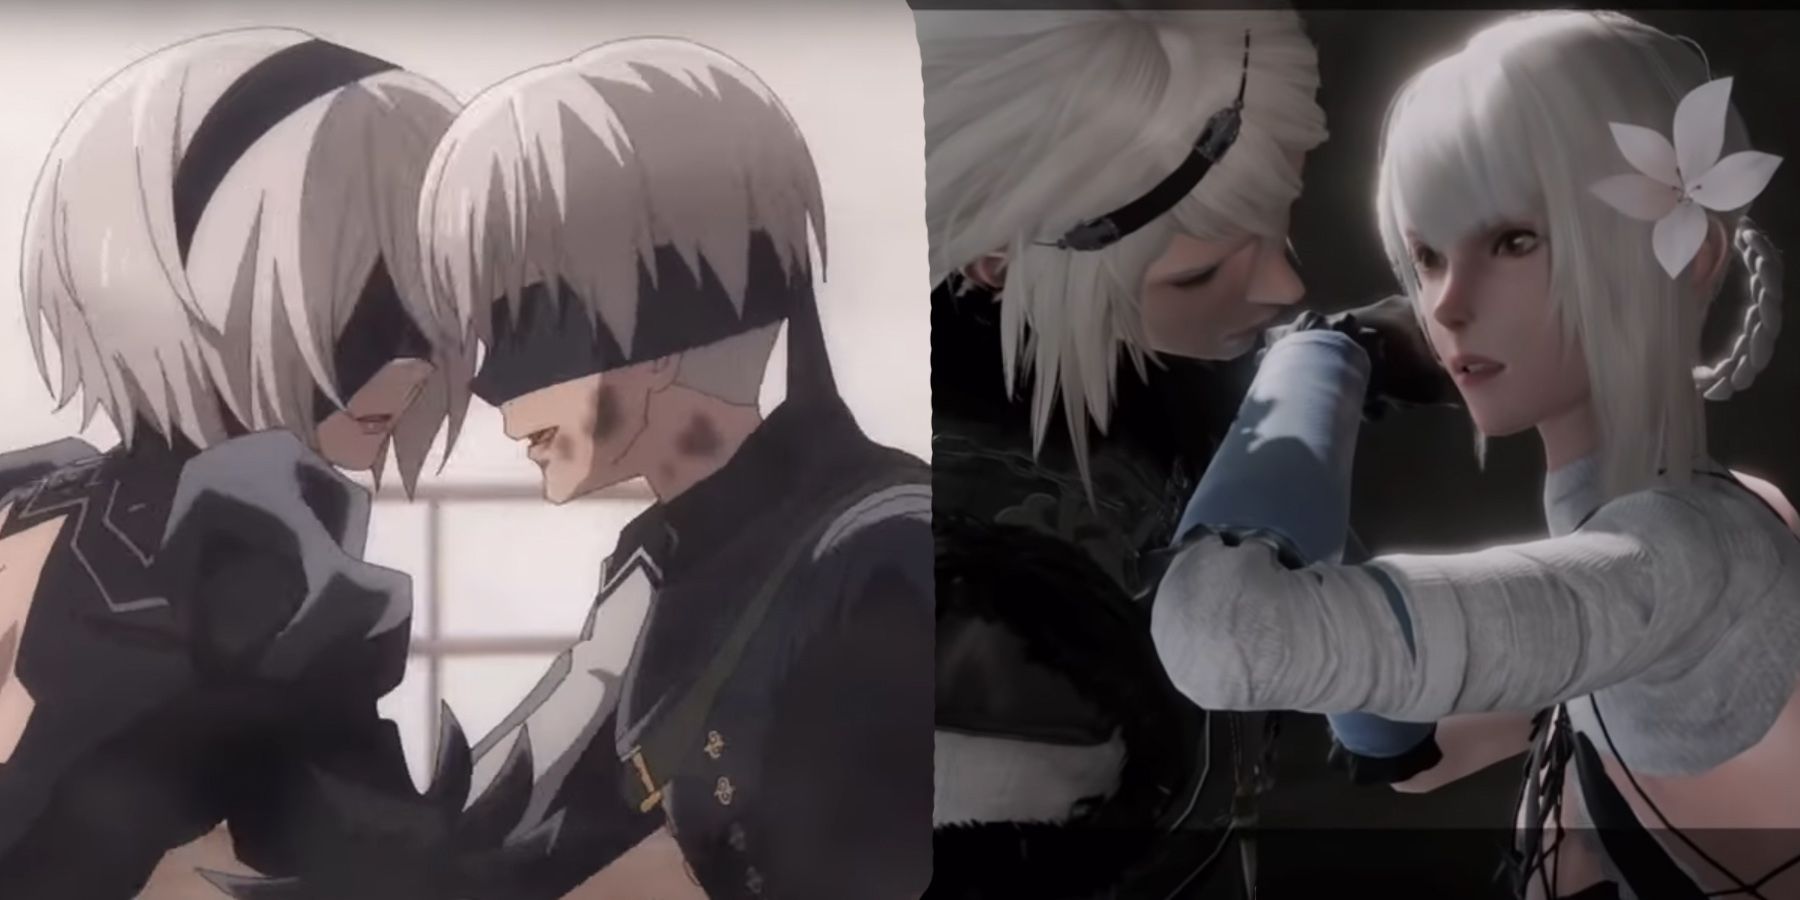 NieR Automata Anime Dub Release Date When Will It Be Dubbed in English